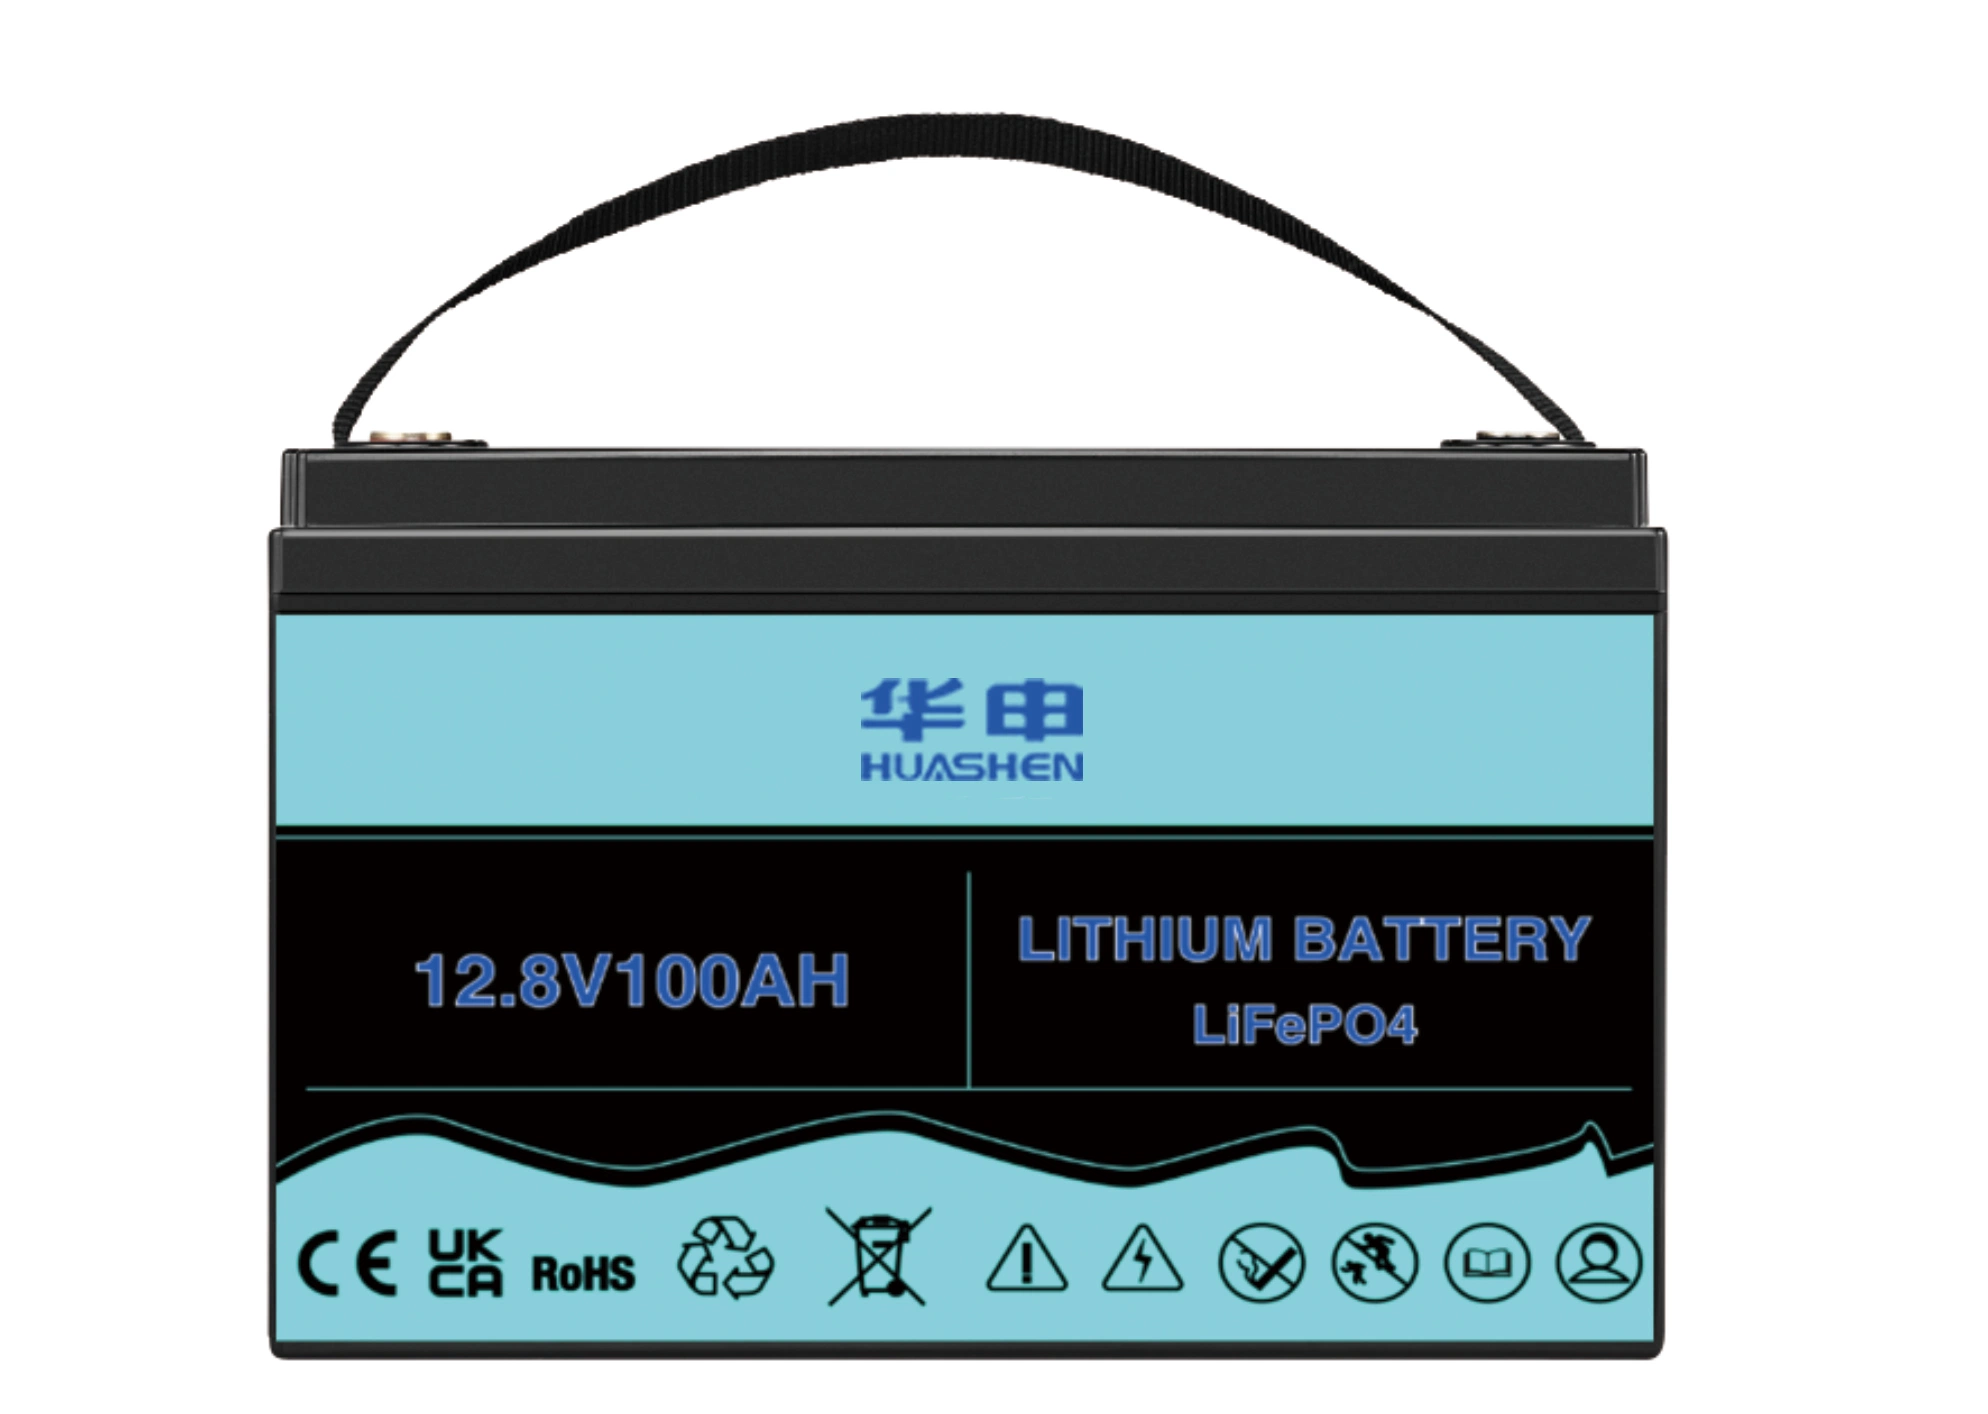 OEM&ODM Customized Deep Cycle Solar Lithium Battery Rechargeable 12V 48V 100ah 200ah LiFePO4 UPS Battery for Home Storage Use